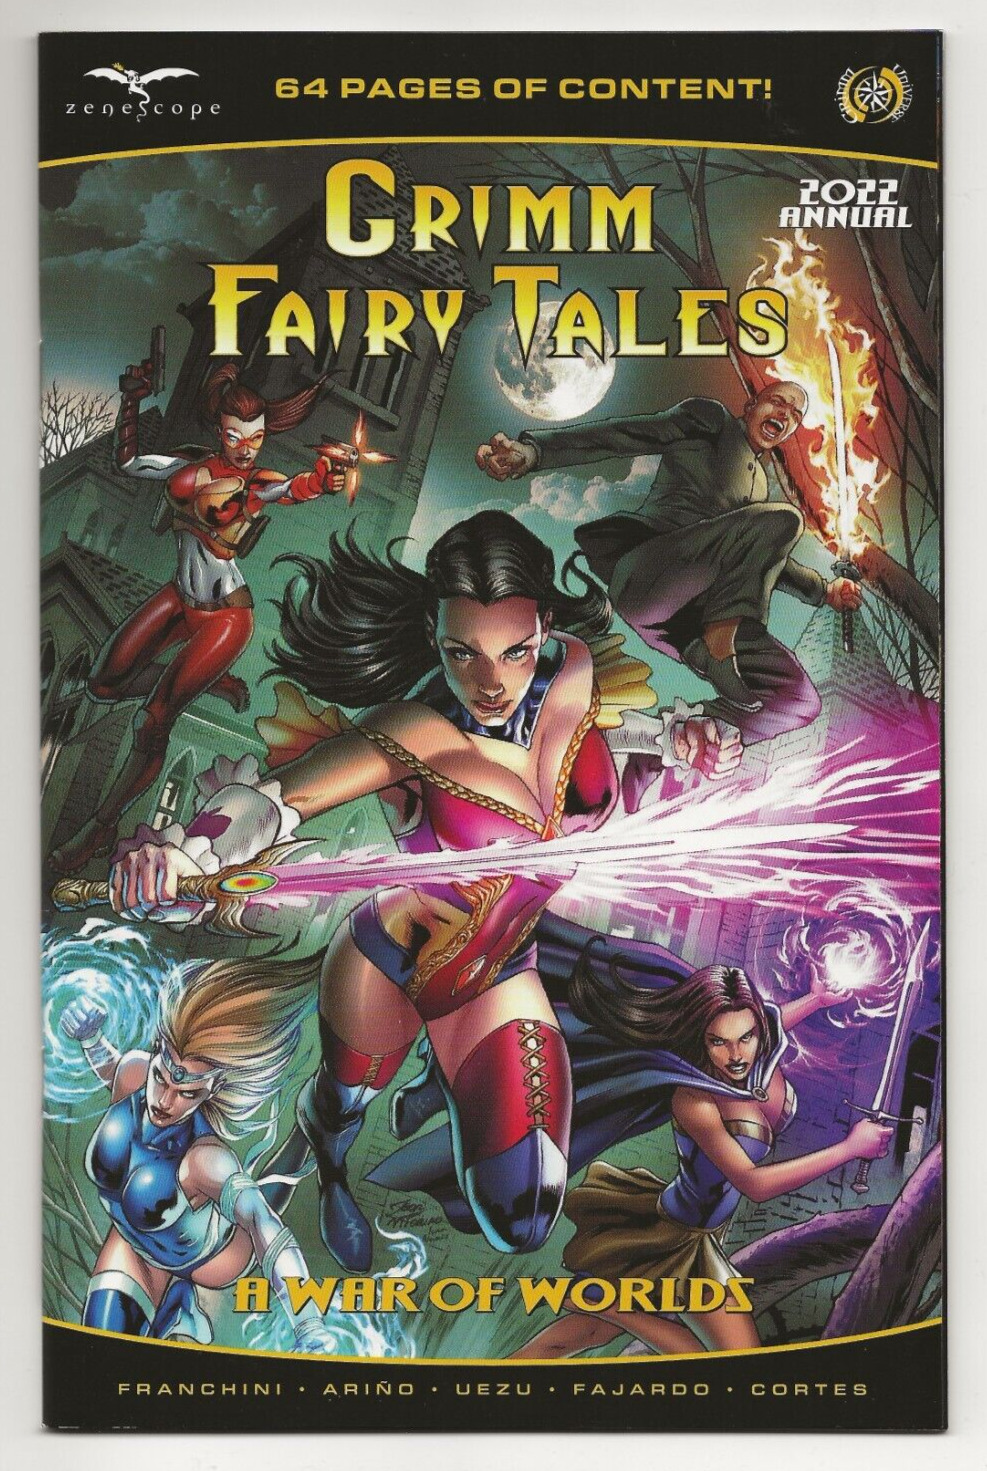 Zenescope GRIMM FAIRY TALES 2022 ANNUAL first printing cover A